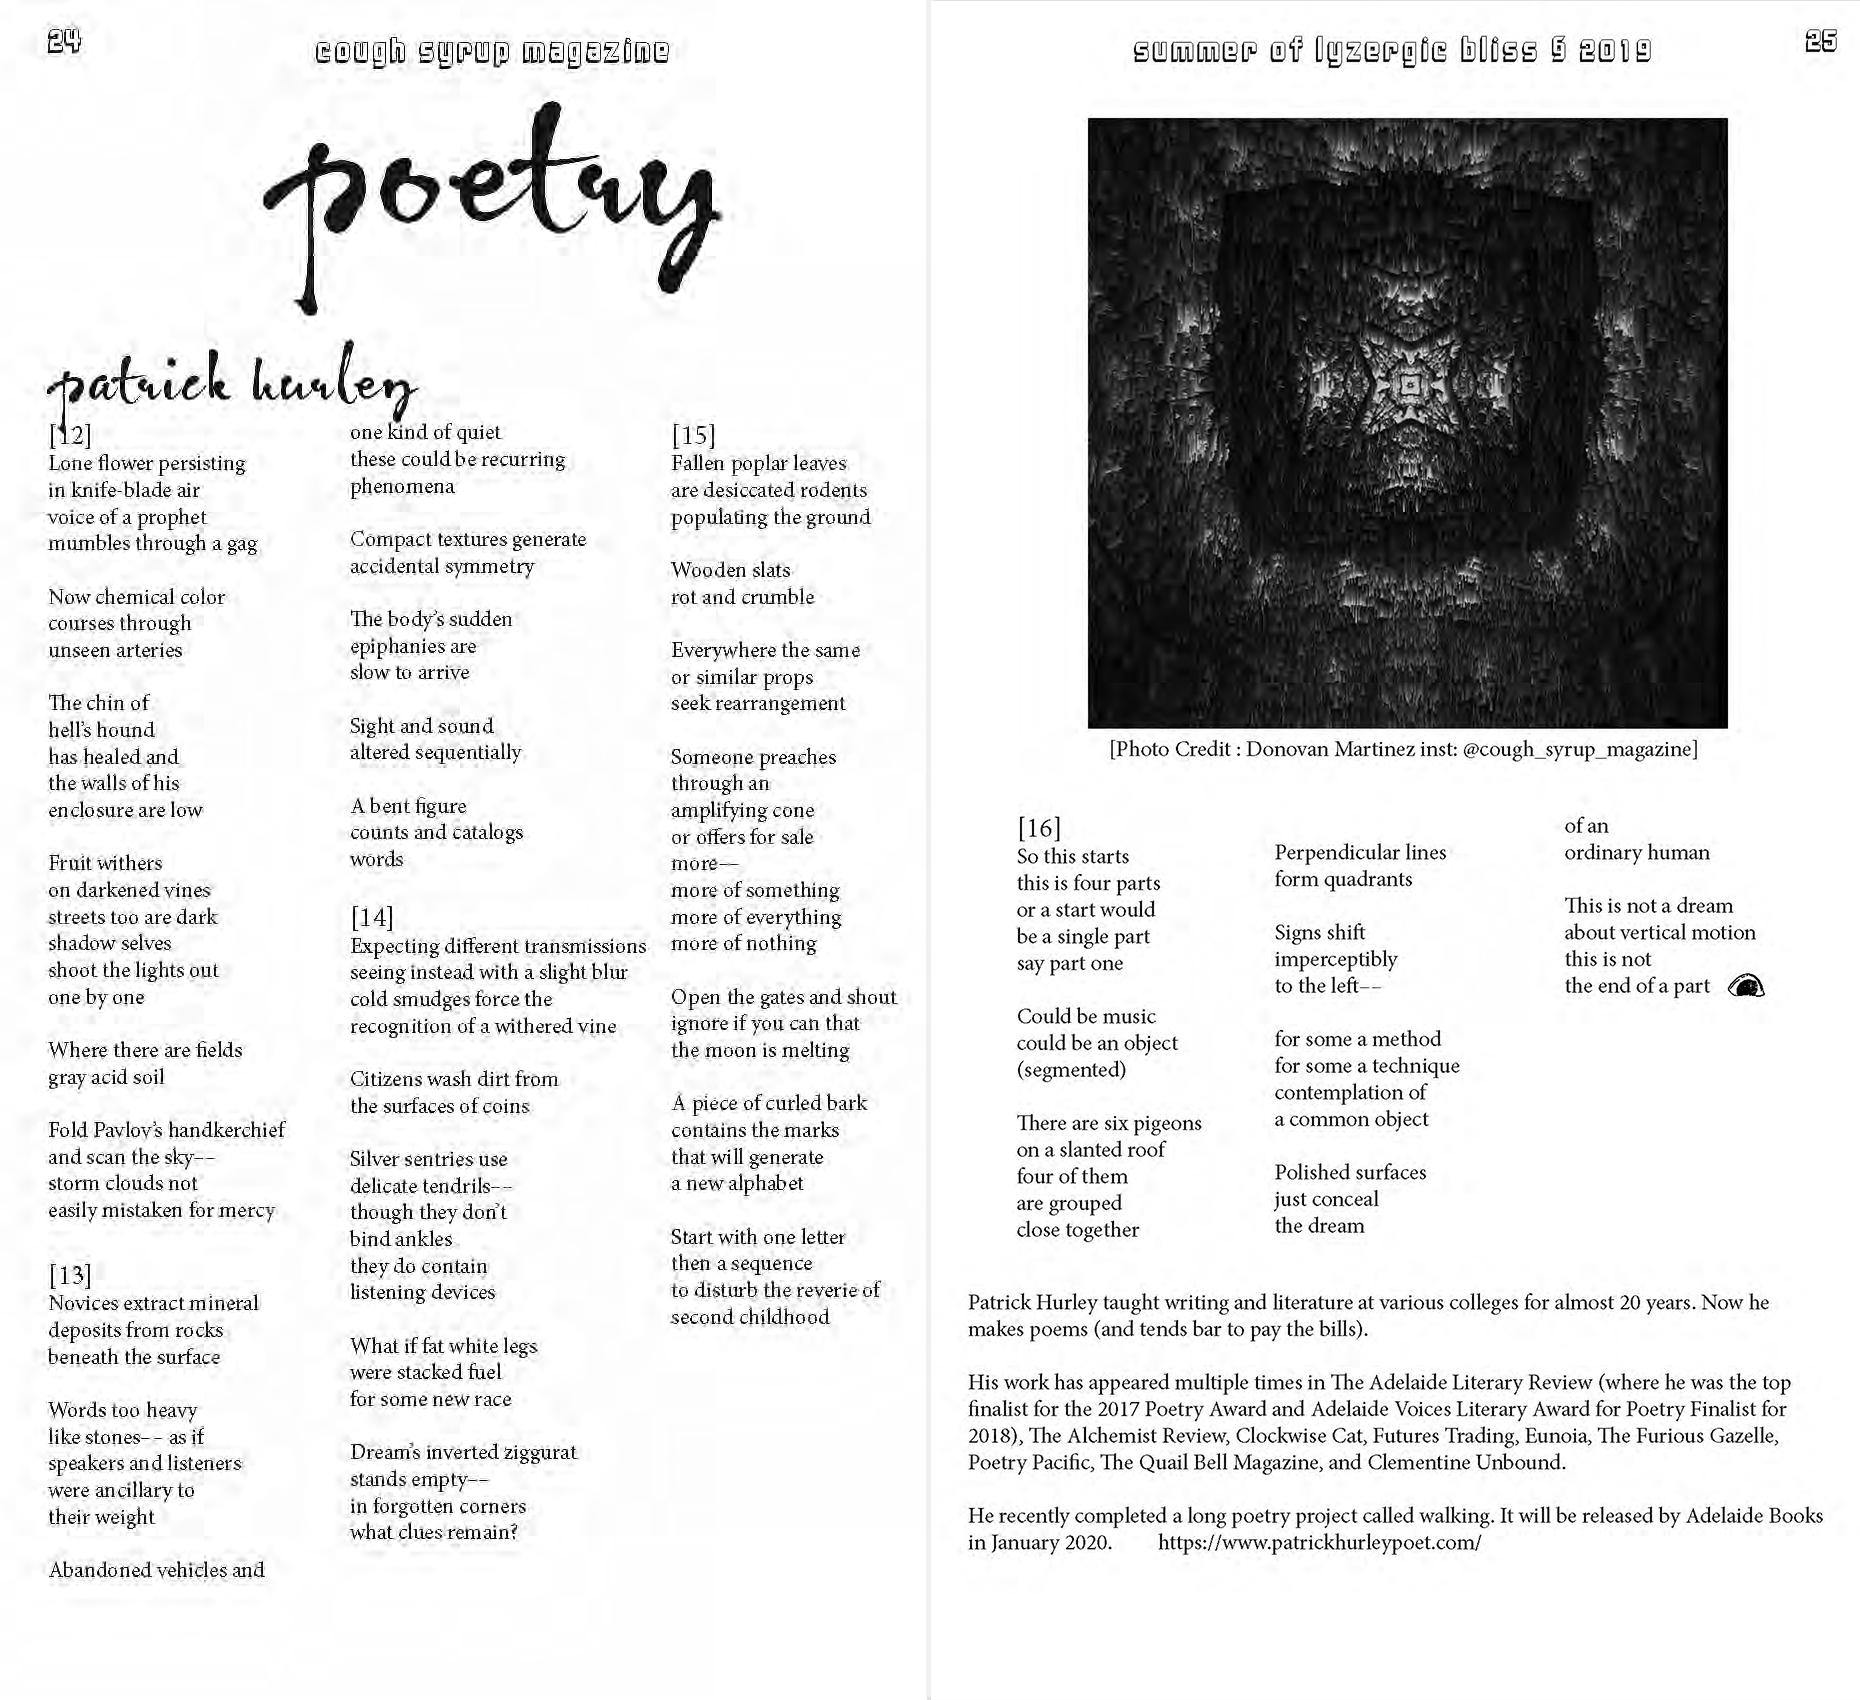 Cough Syrup Magazine Summer 2019: Poetry fronticepiece spread, Patrick Hurley's Selections from 'Neck'